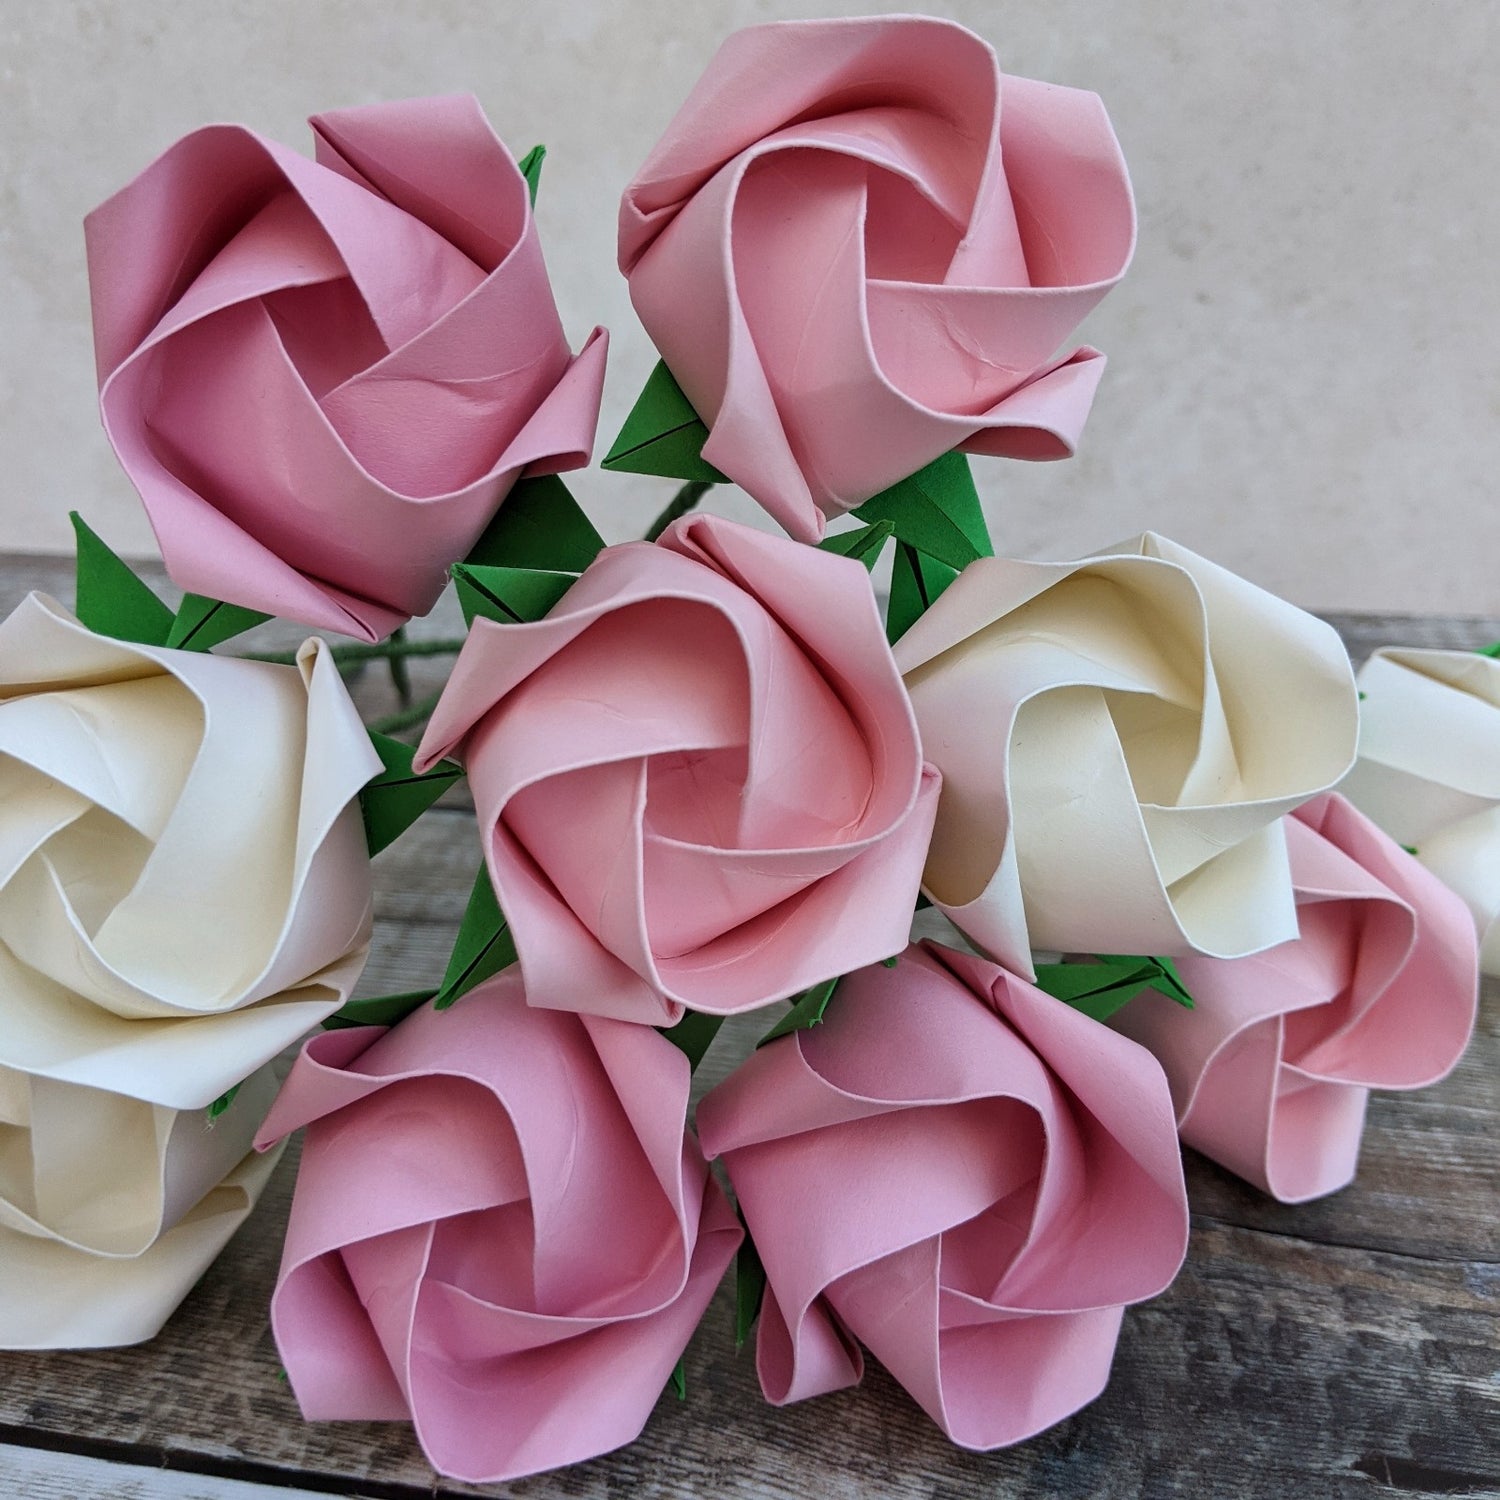 Beautiful big bouquet of a dozen origami paper roses in white and pastel pink